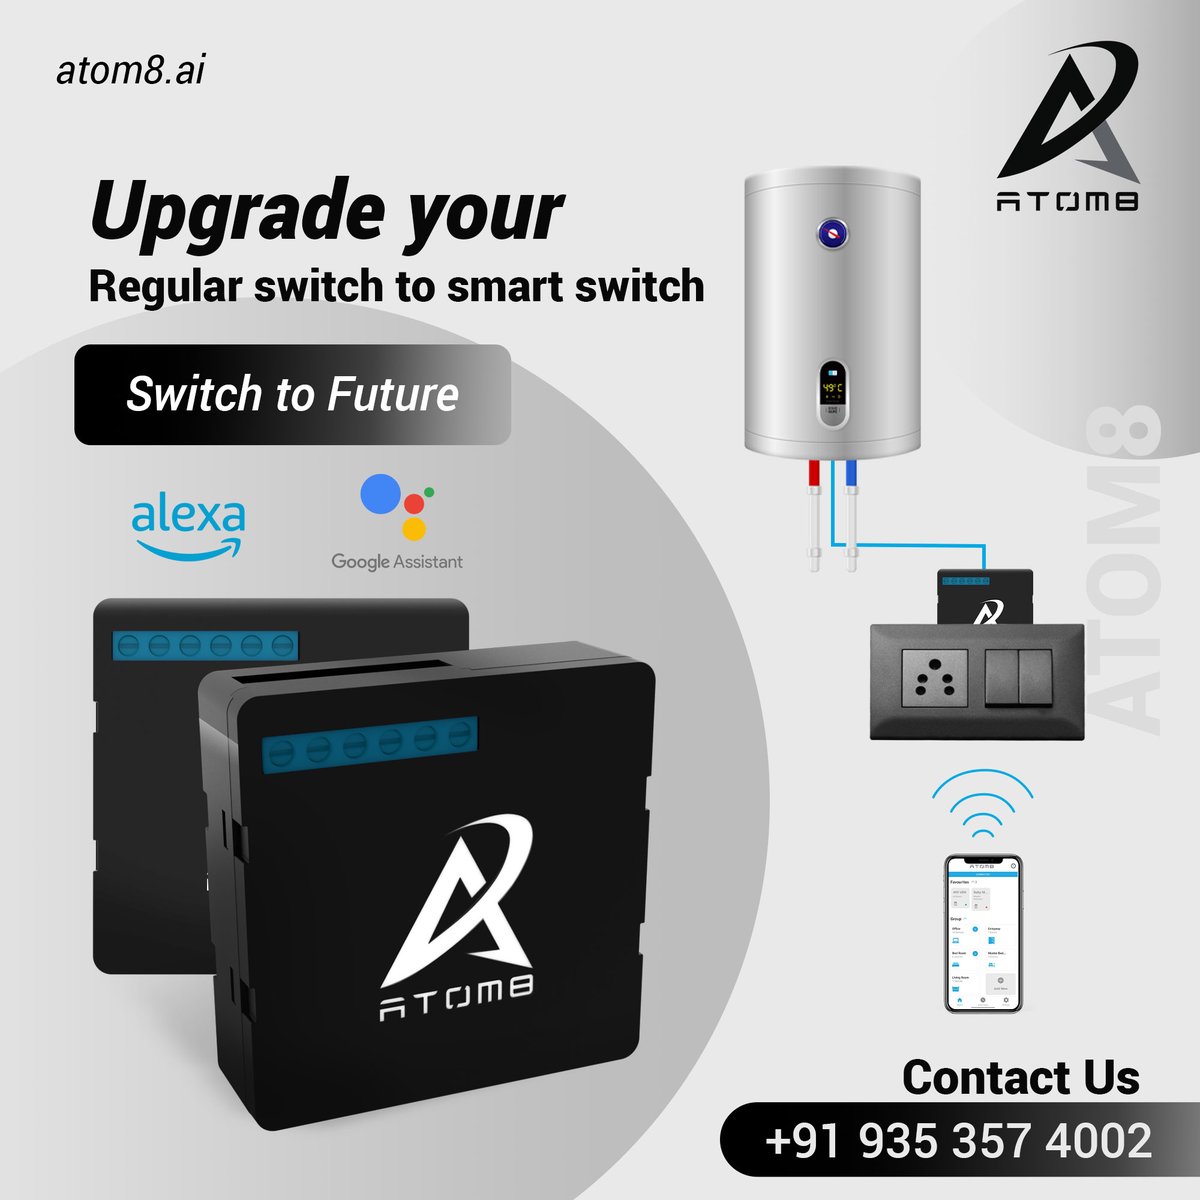 Power up your peace of mind.  Atom8 smart switches let you monitor and manage high-power appliances remotely, ensuring safety and saving you energy.

#wifismartswitch #smartswitches #wifiswitches #mobilecontrol #devicecontrol #smarthomedevices #houseautomation #smarthomedevices